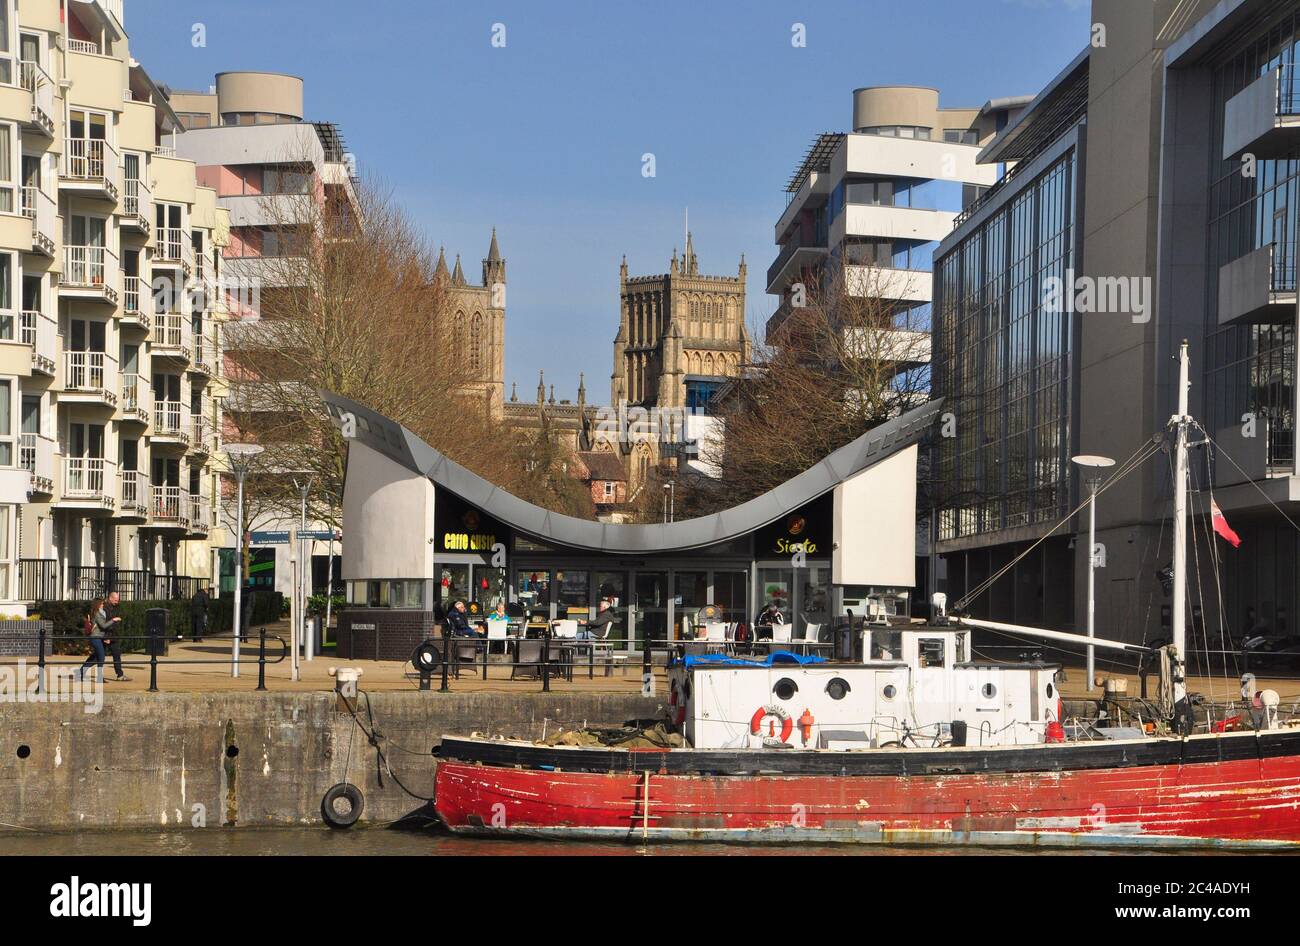 Bristol's Anglican Cathedral framed by the modern office and accomodation developments on the nearby harbour with an old wooden boat moored at the qua Stock Photo